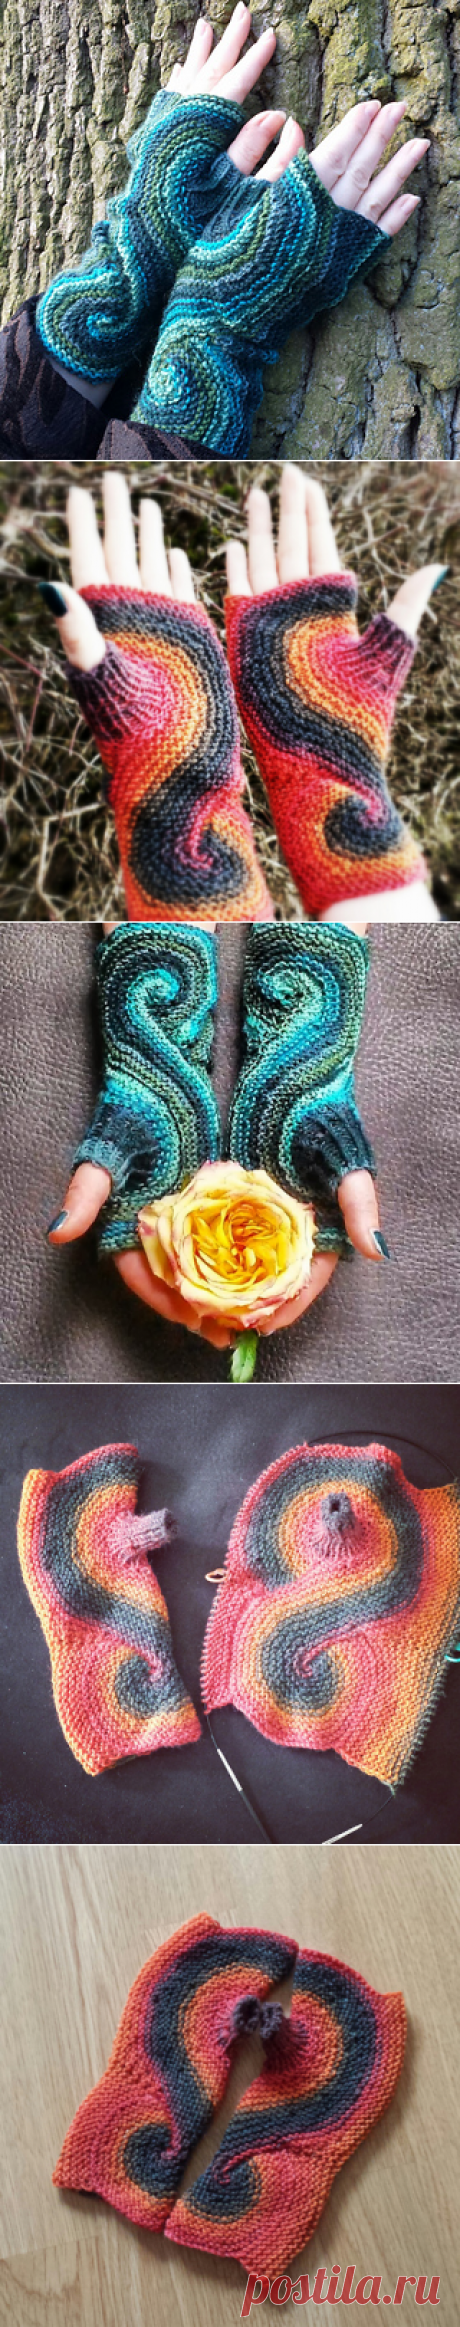 Ravelry: Pieces of Eight Mitts pattern by Sybil R